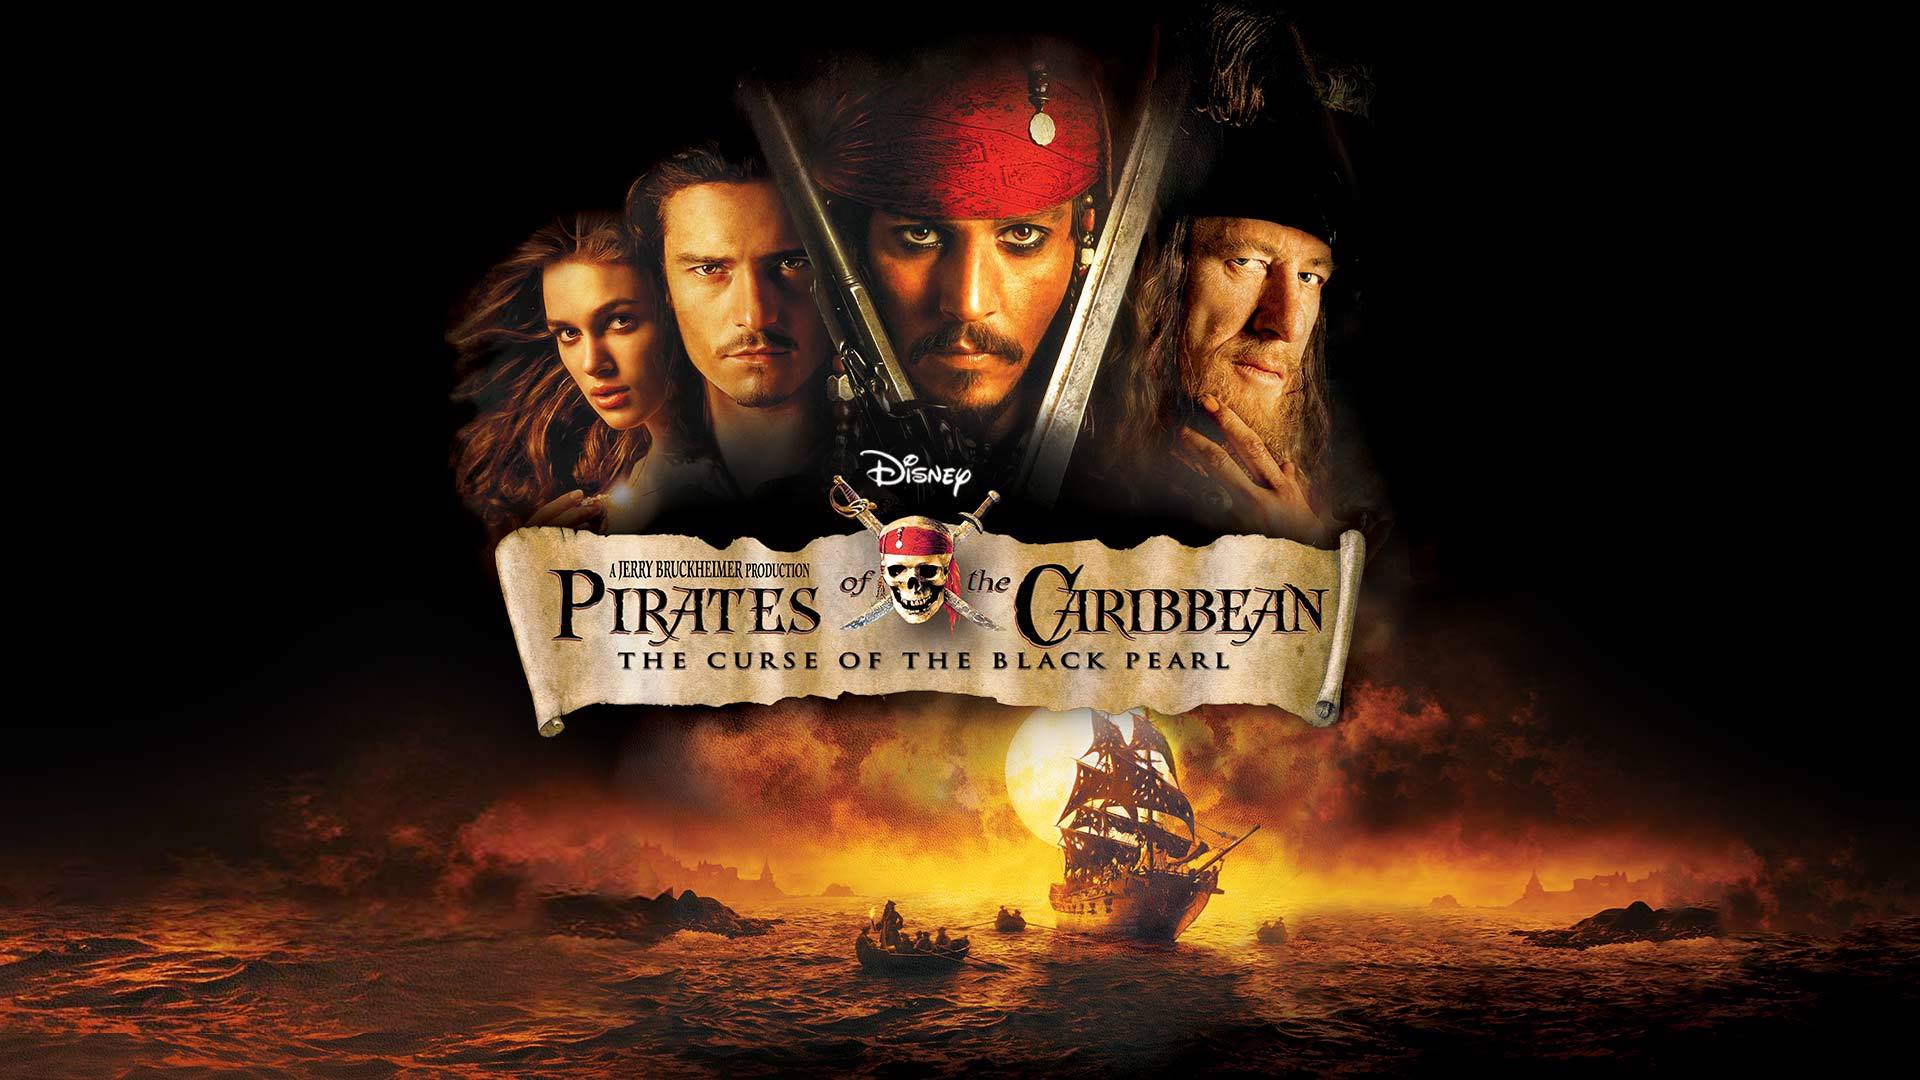 Watch Pirates Of The Caribbean 2 Free Online - Pirates 2 Movie Free Online